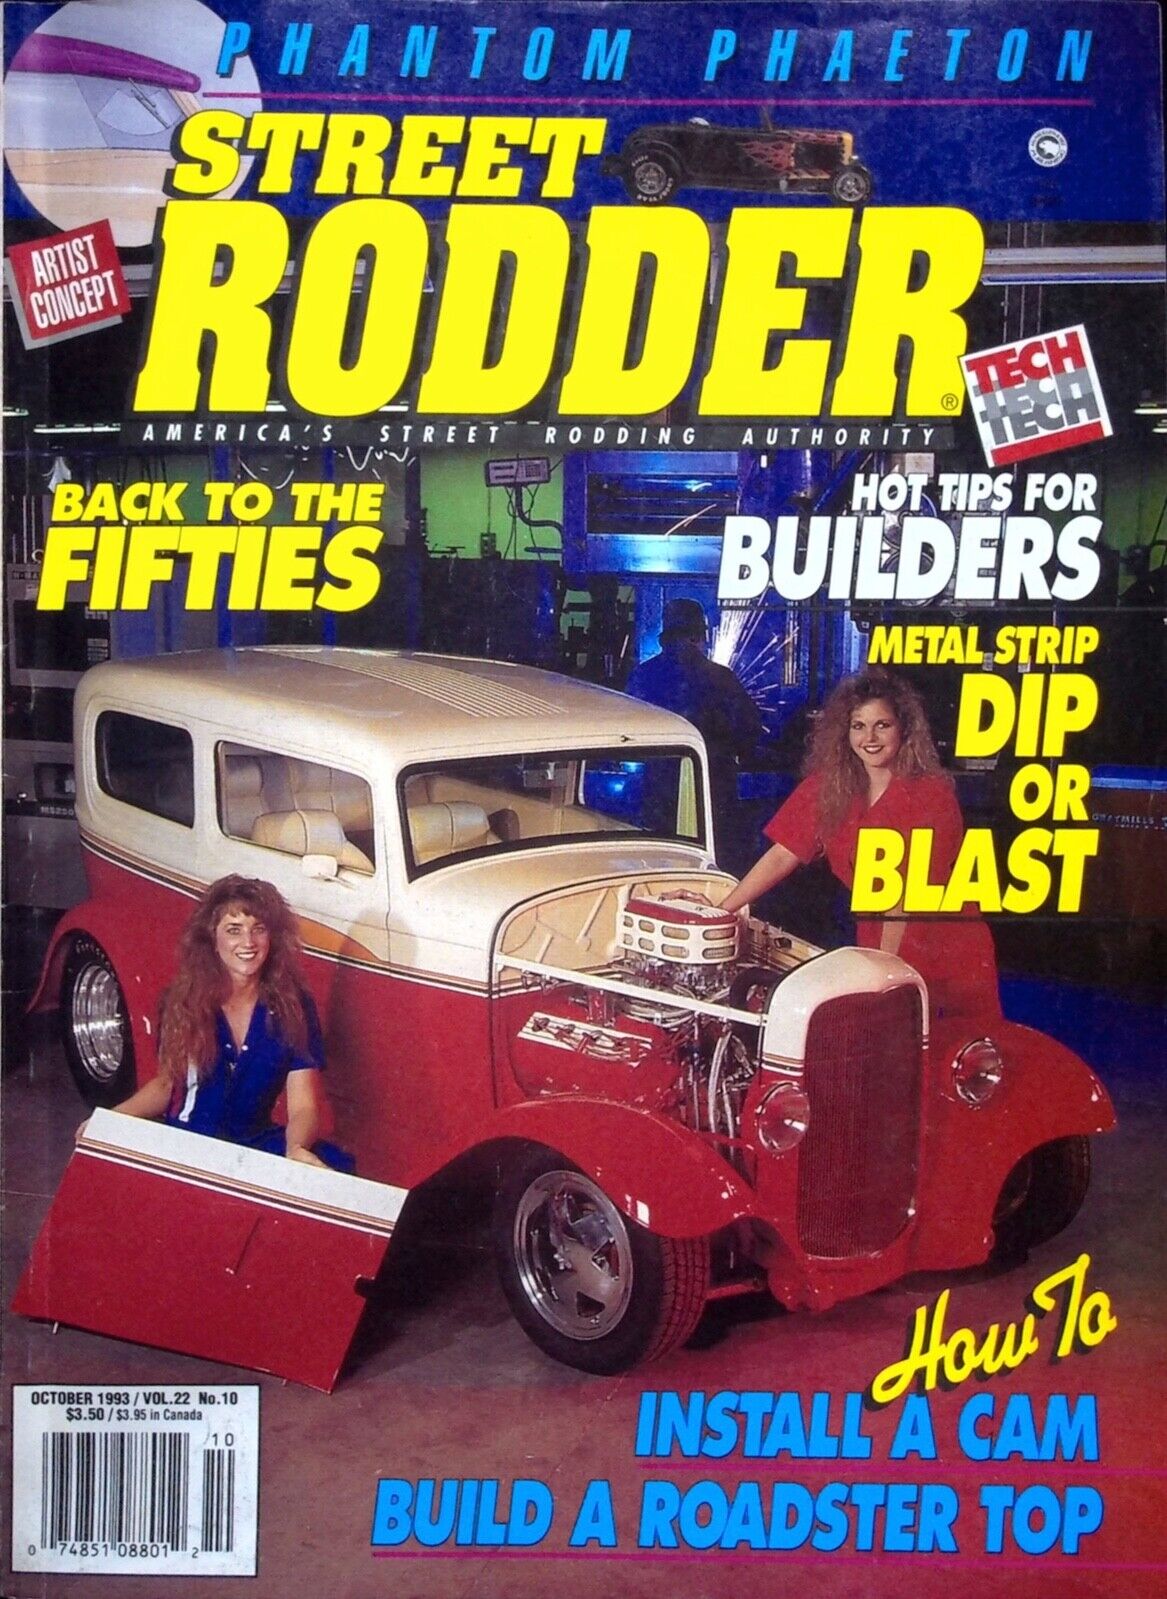 BACK TO THE FIFTIES - STREET RODDER MAGAZINE, OCTOBER 1993 / VOL.22 No.10